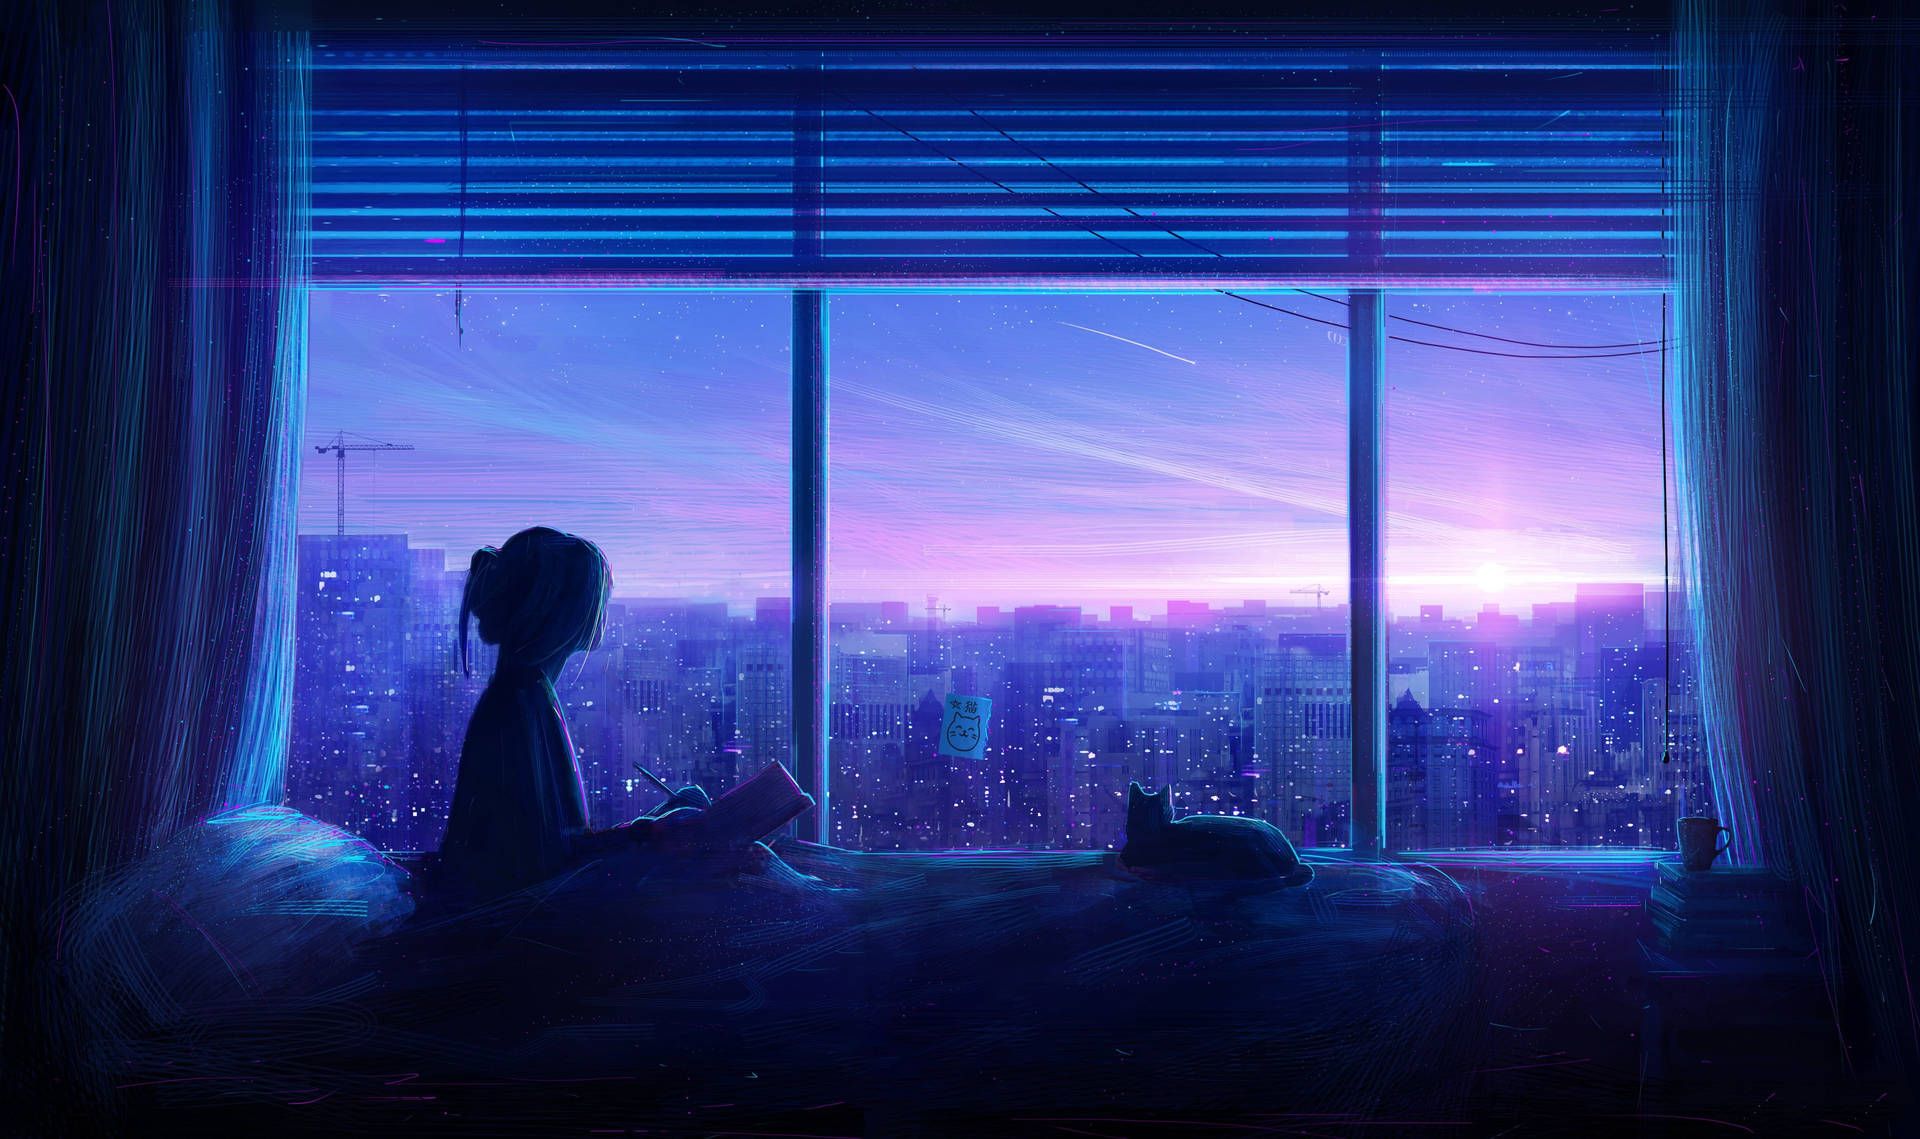 A girl and a cat are sitting on the bed and looking out the window at the city. - Blue anime